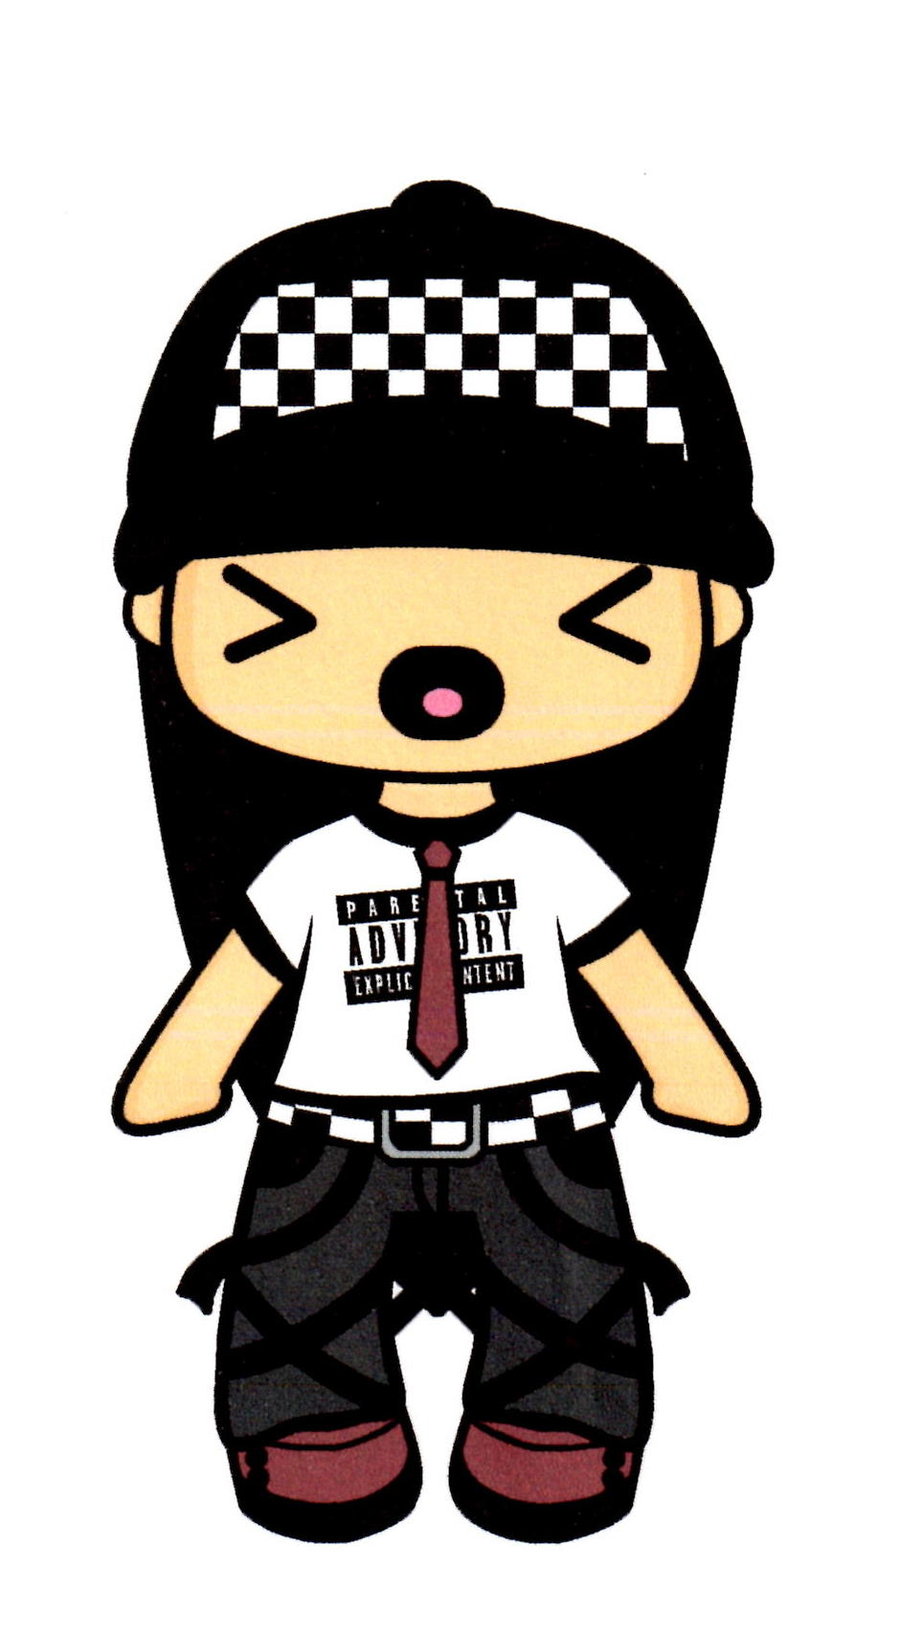 Cute Emo Girl With Tattoos - ClipArt Best